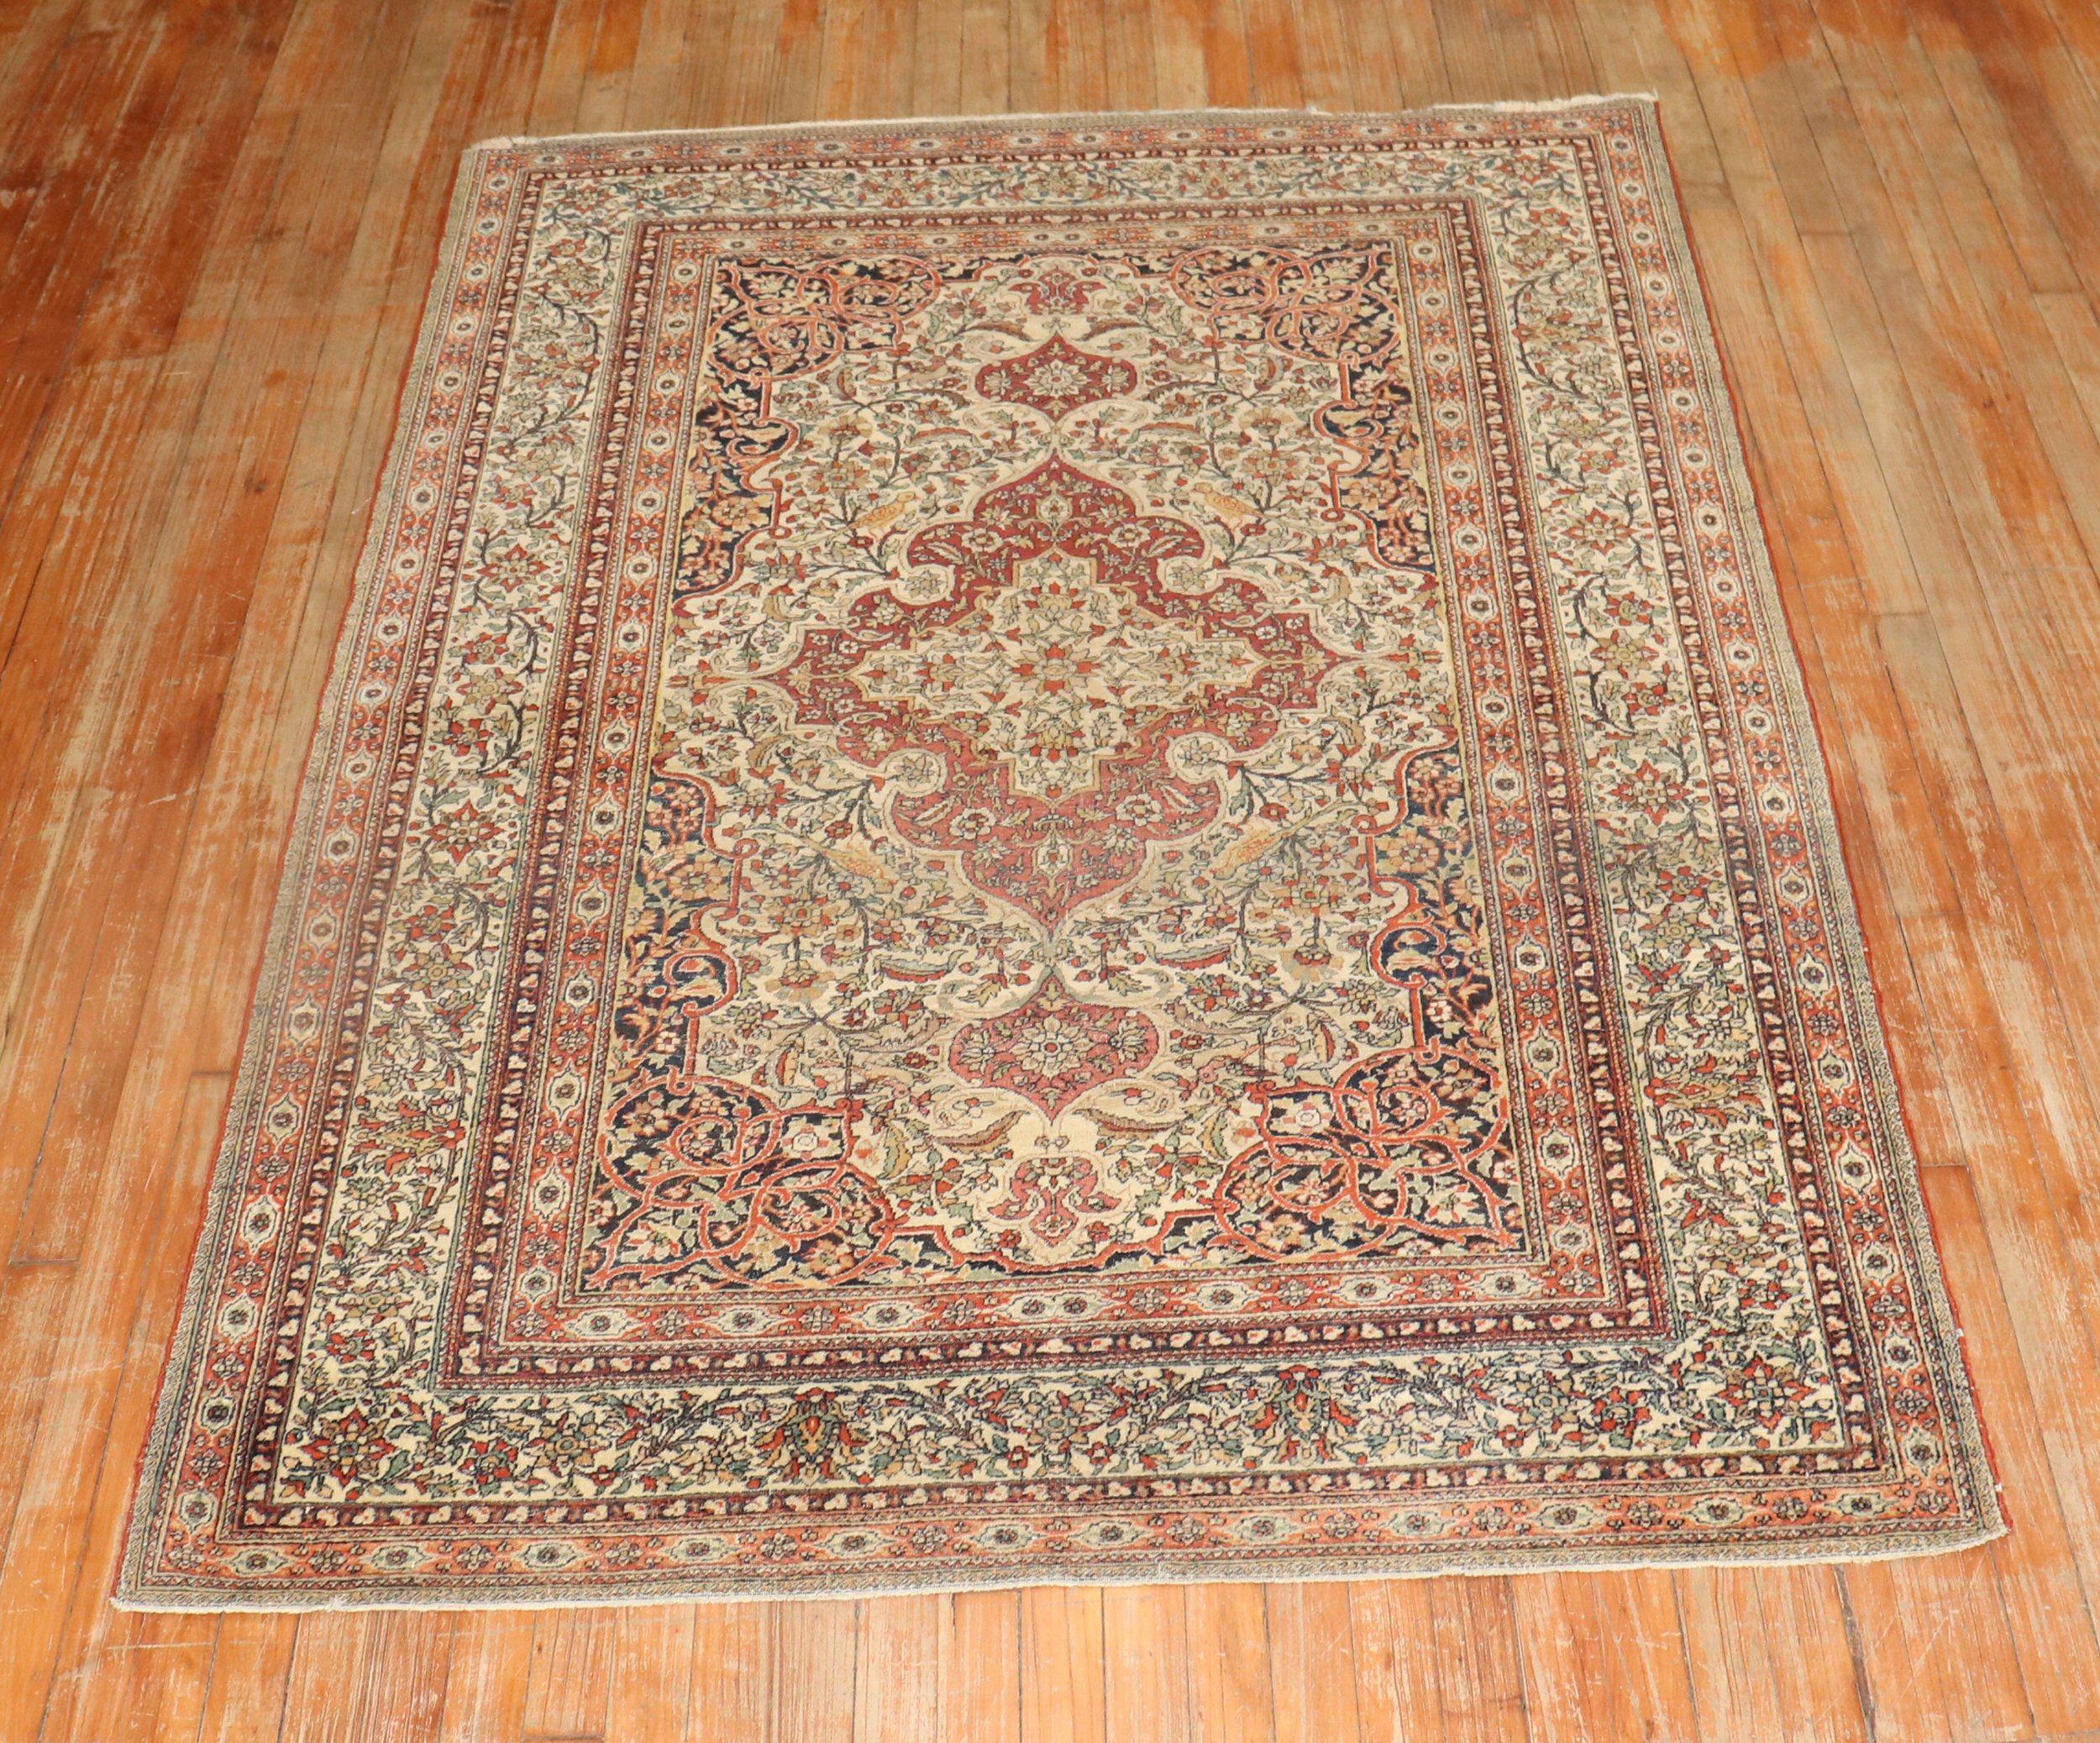 Hand-Woven Pictorial Persian Isfahan Prayer Carpet For Sale